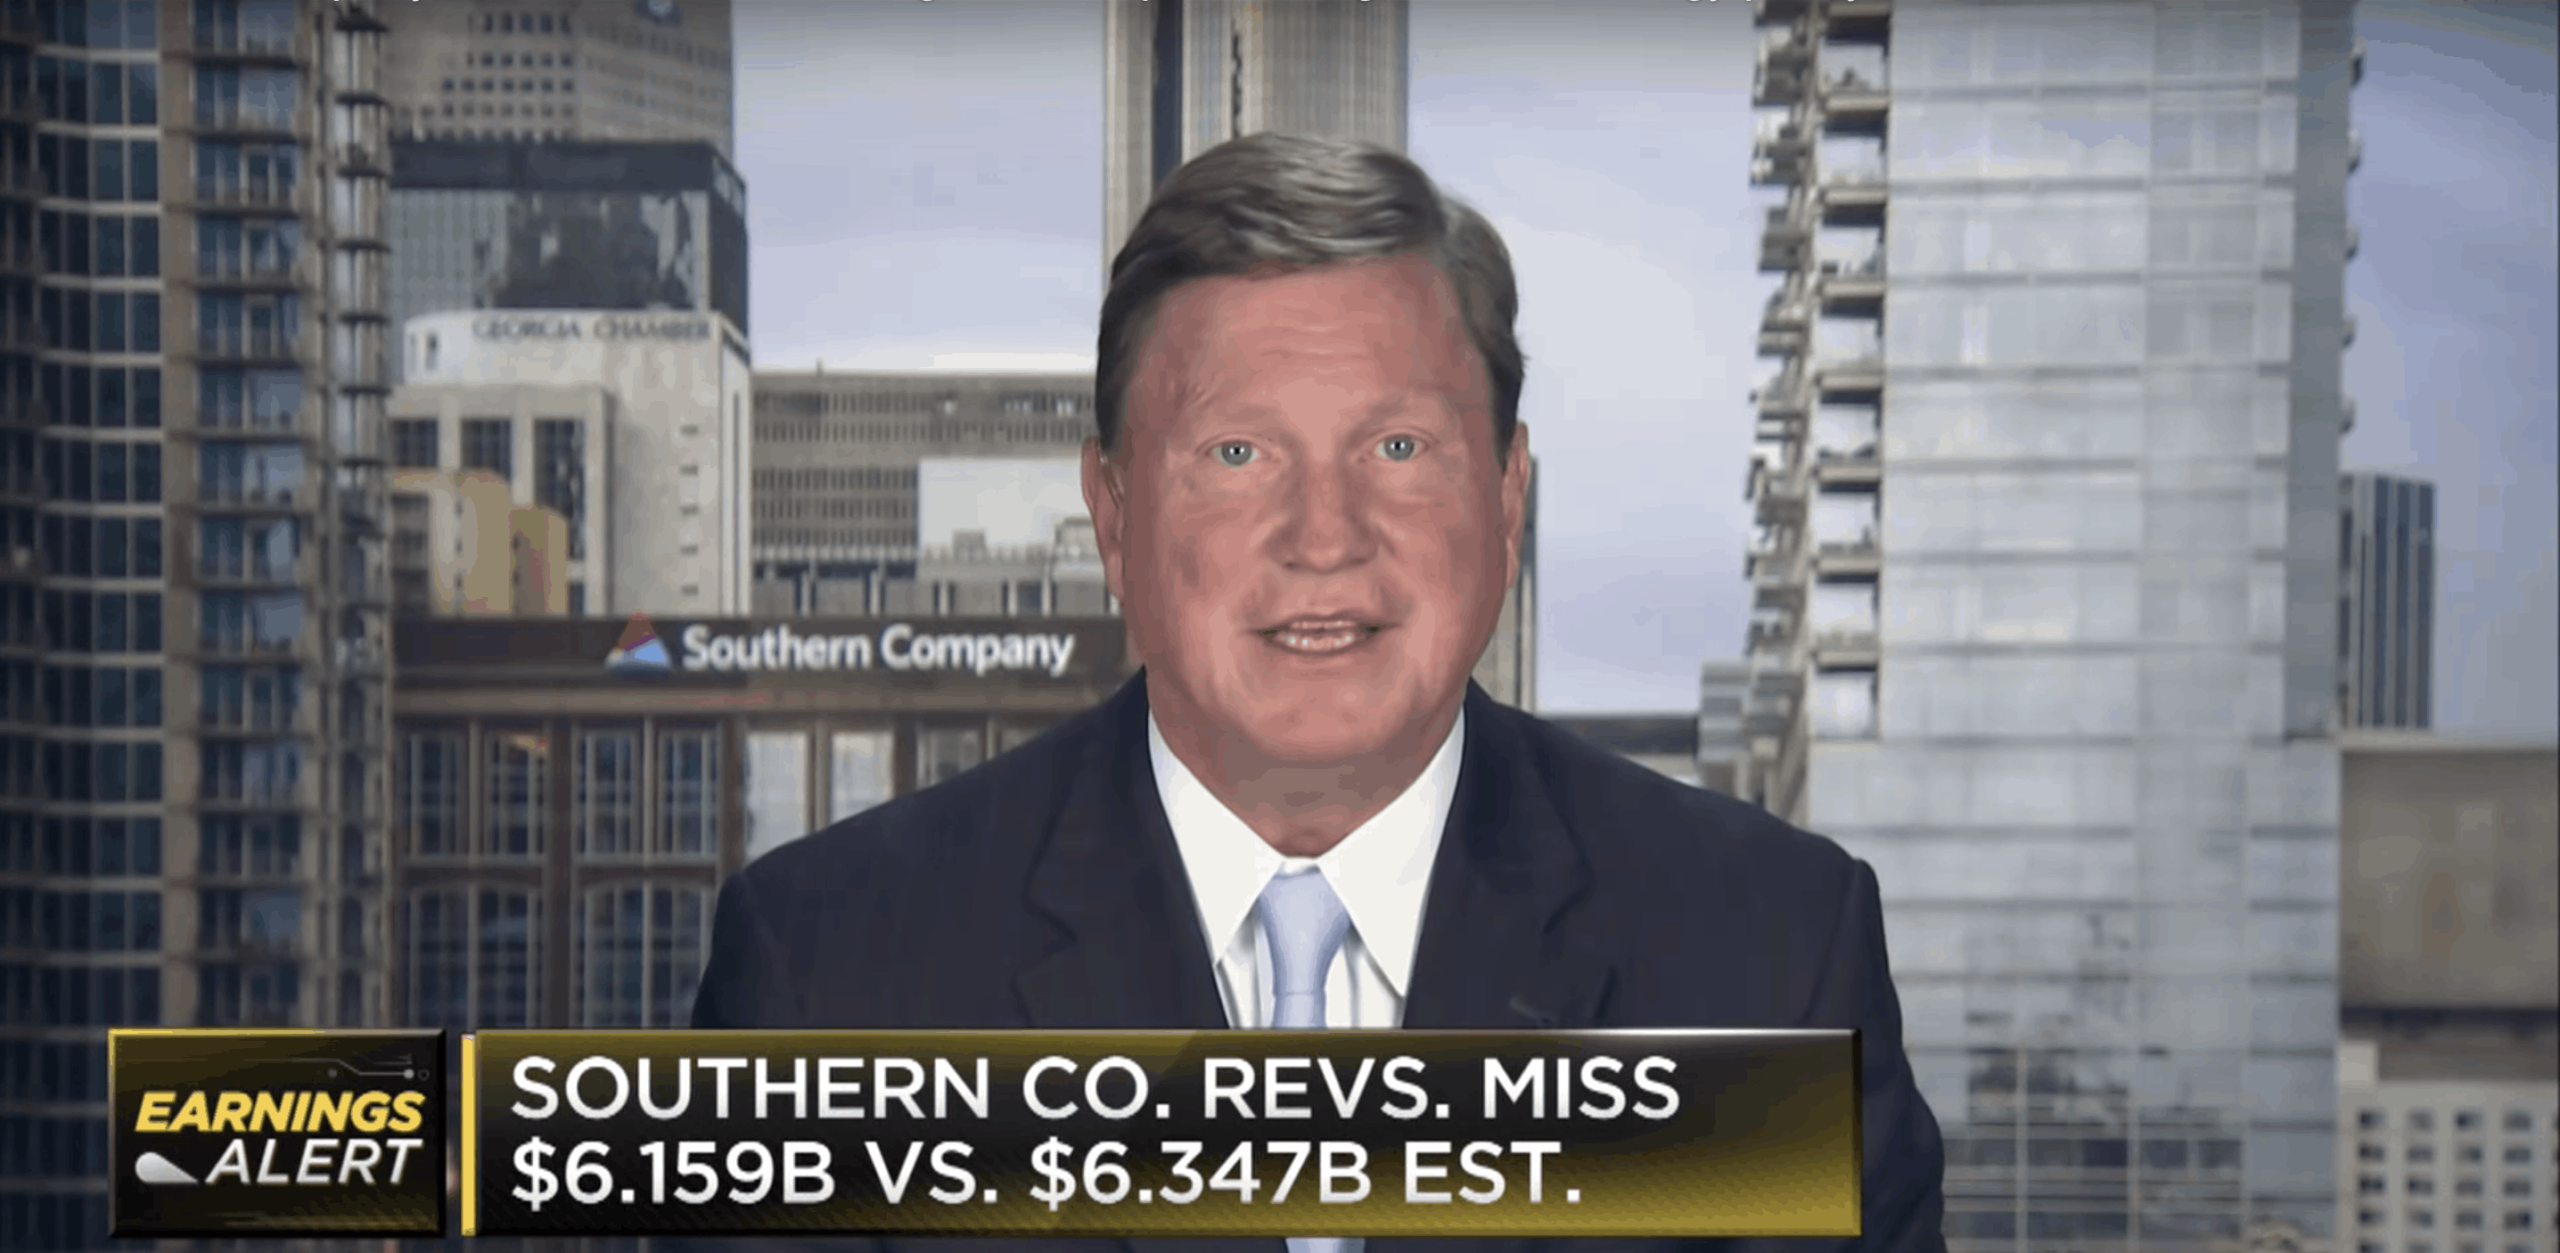 Southern Company CEO Tom Fanning on CNBC